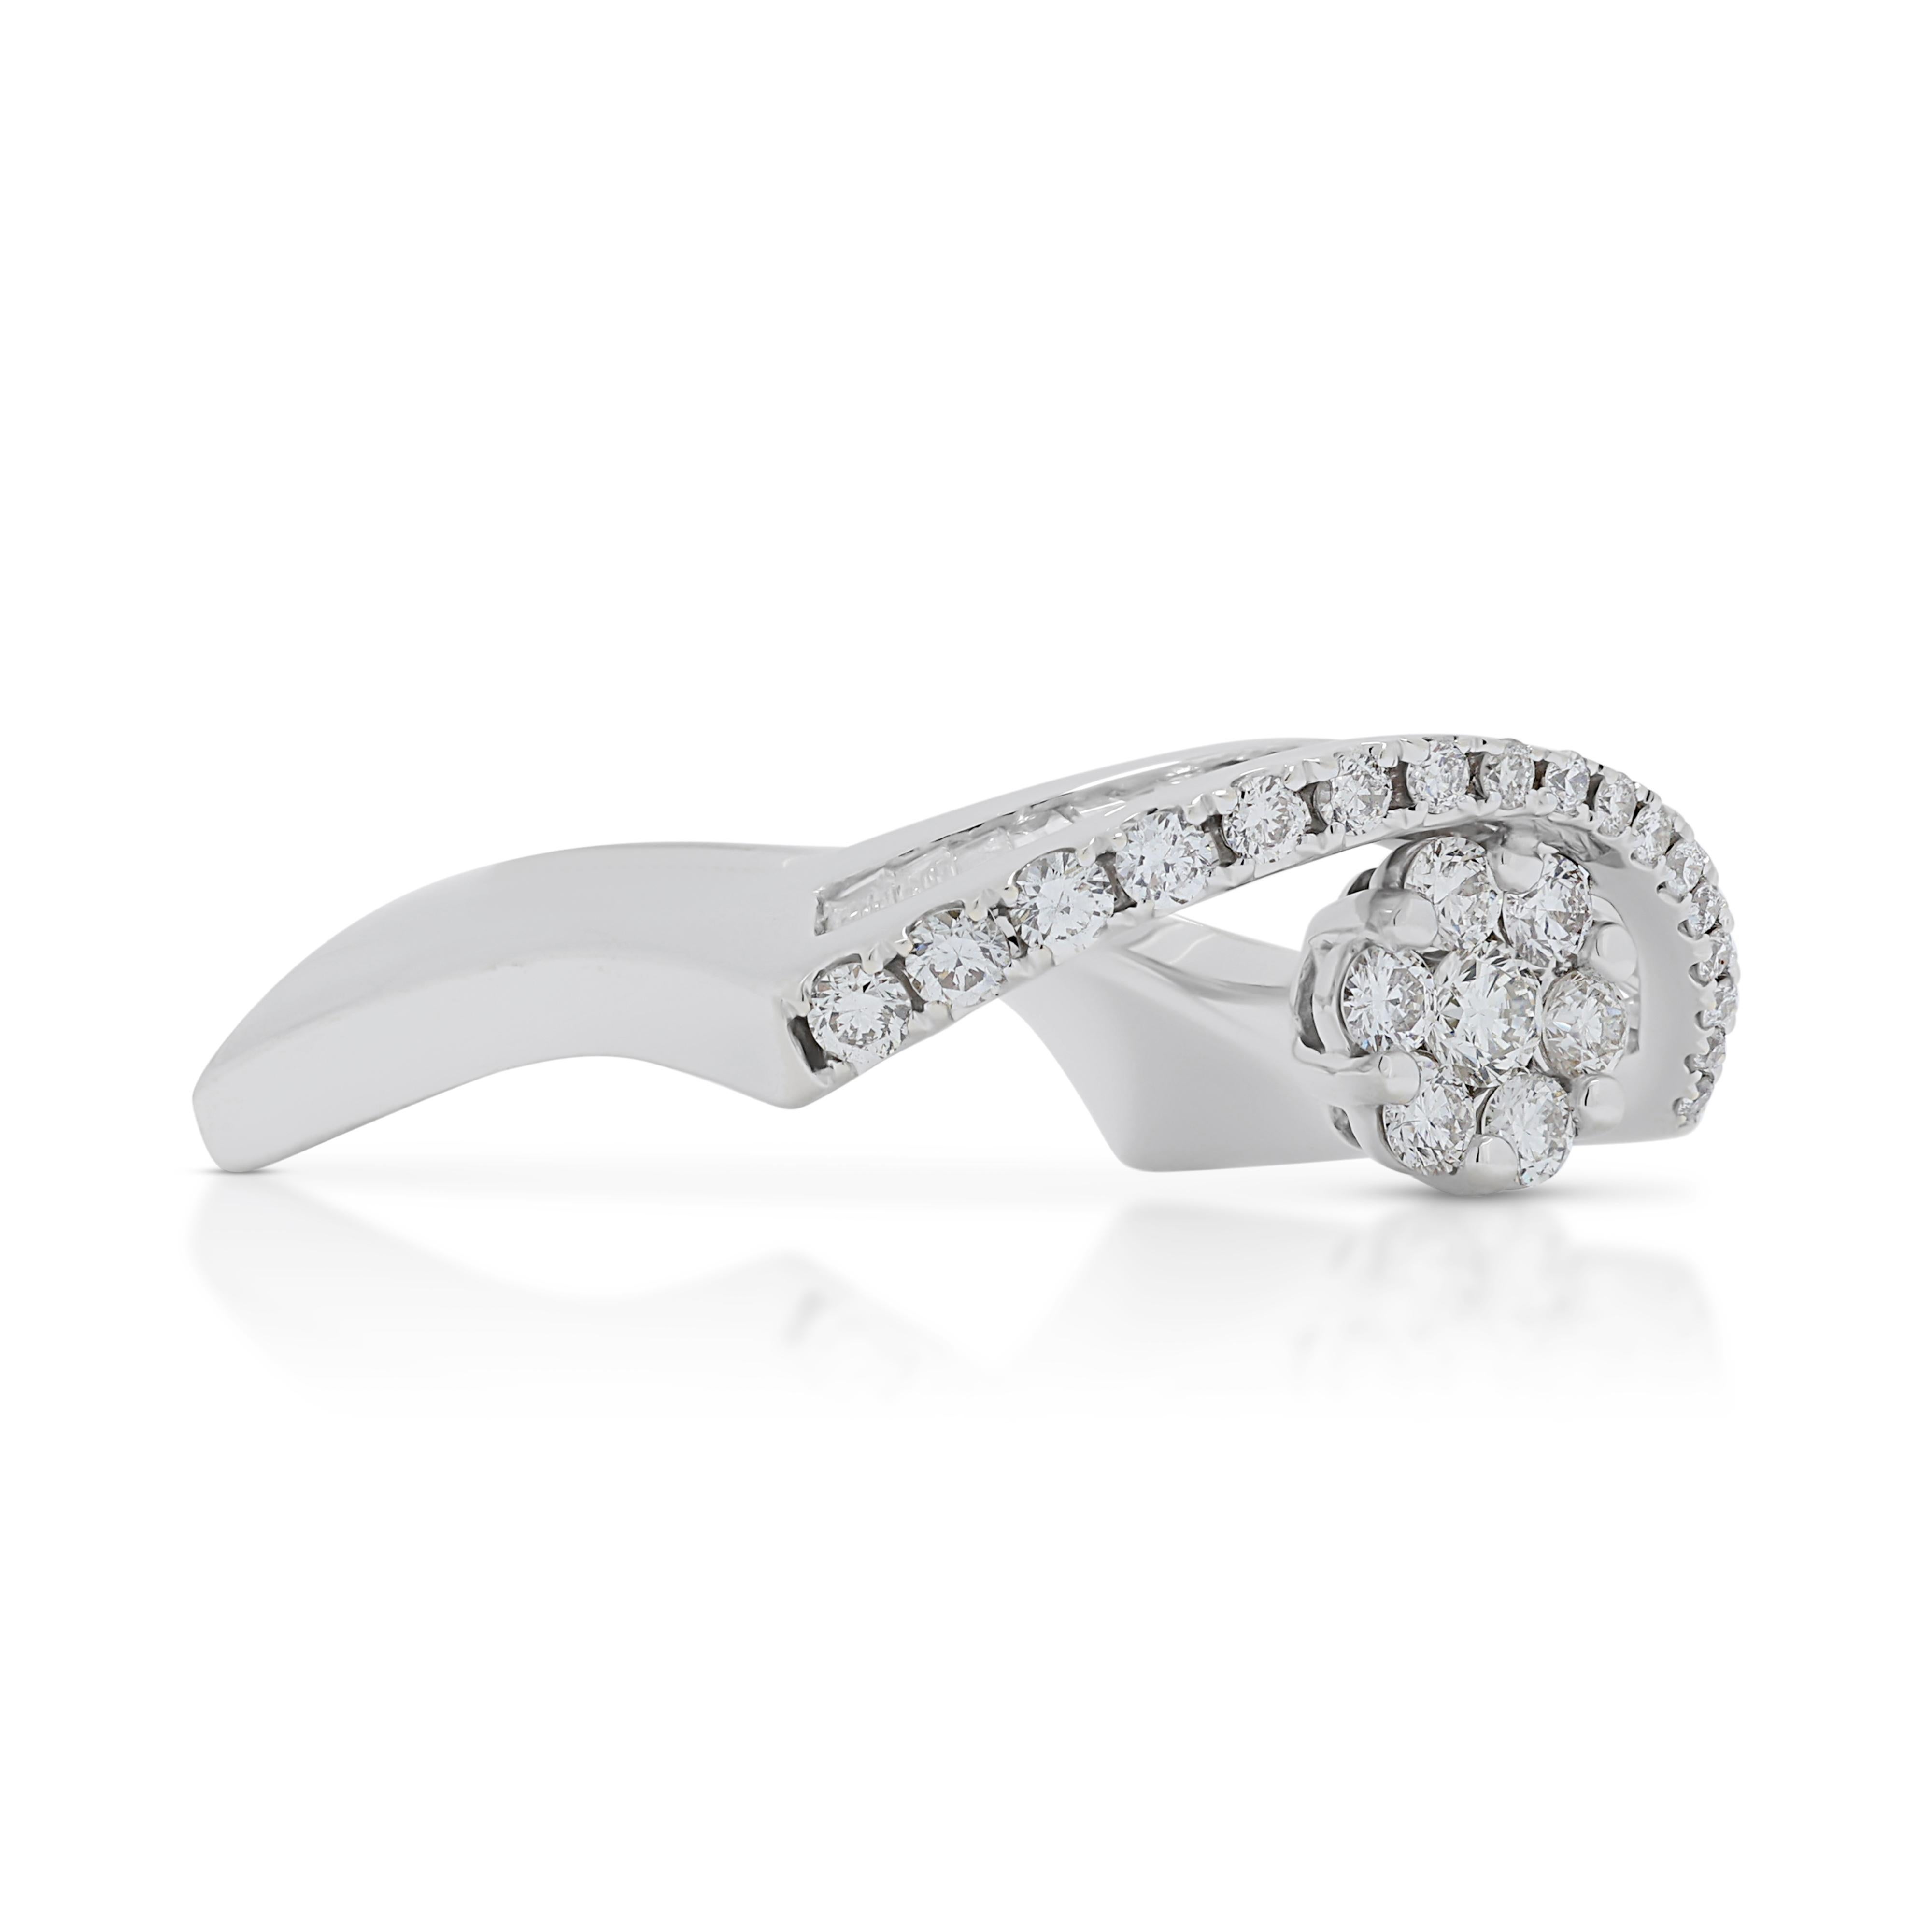 Women's Stylish 0.85ct Diamonds Ring in 18K White Gold For Sale